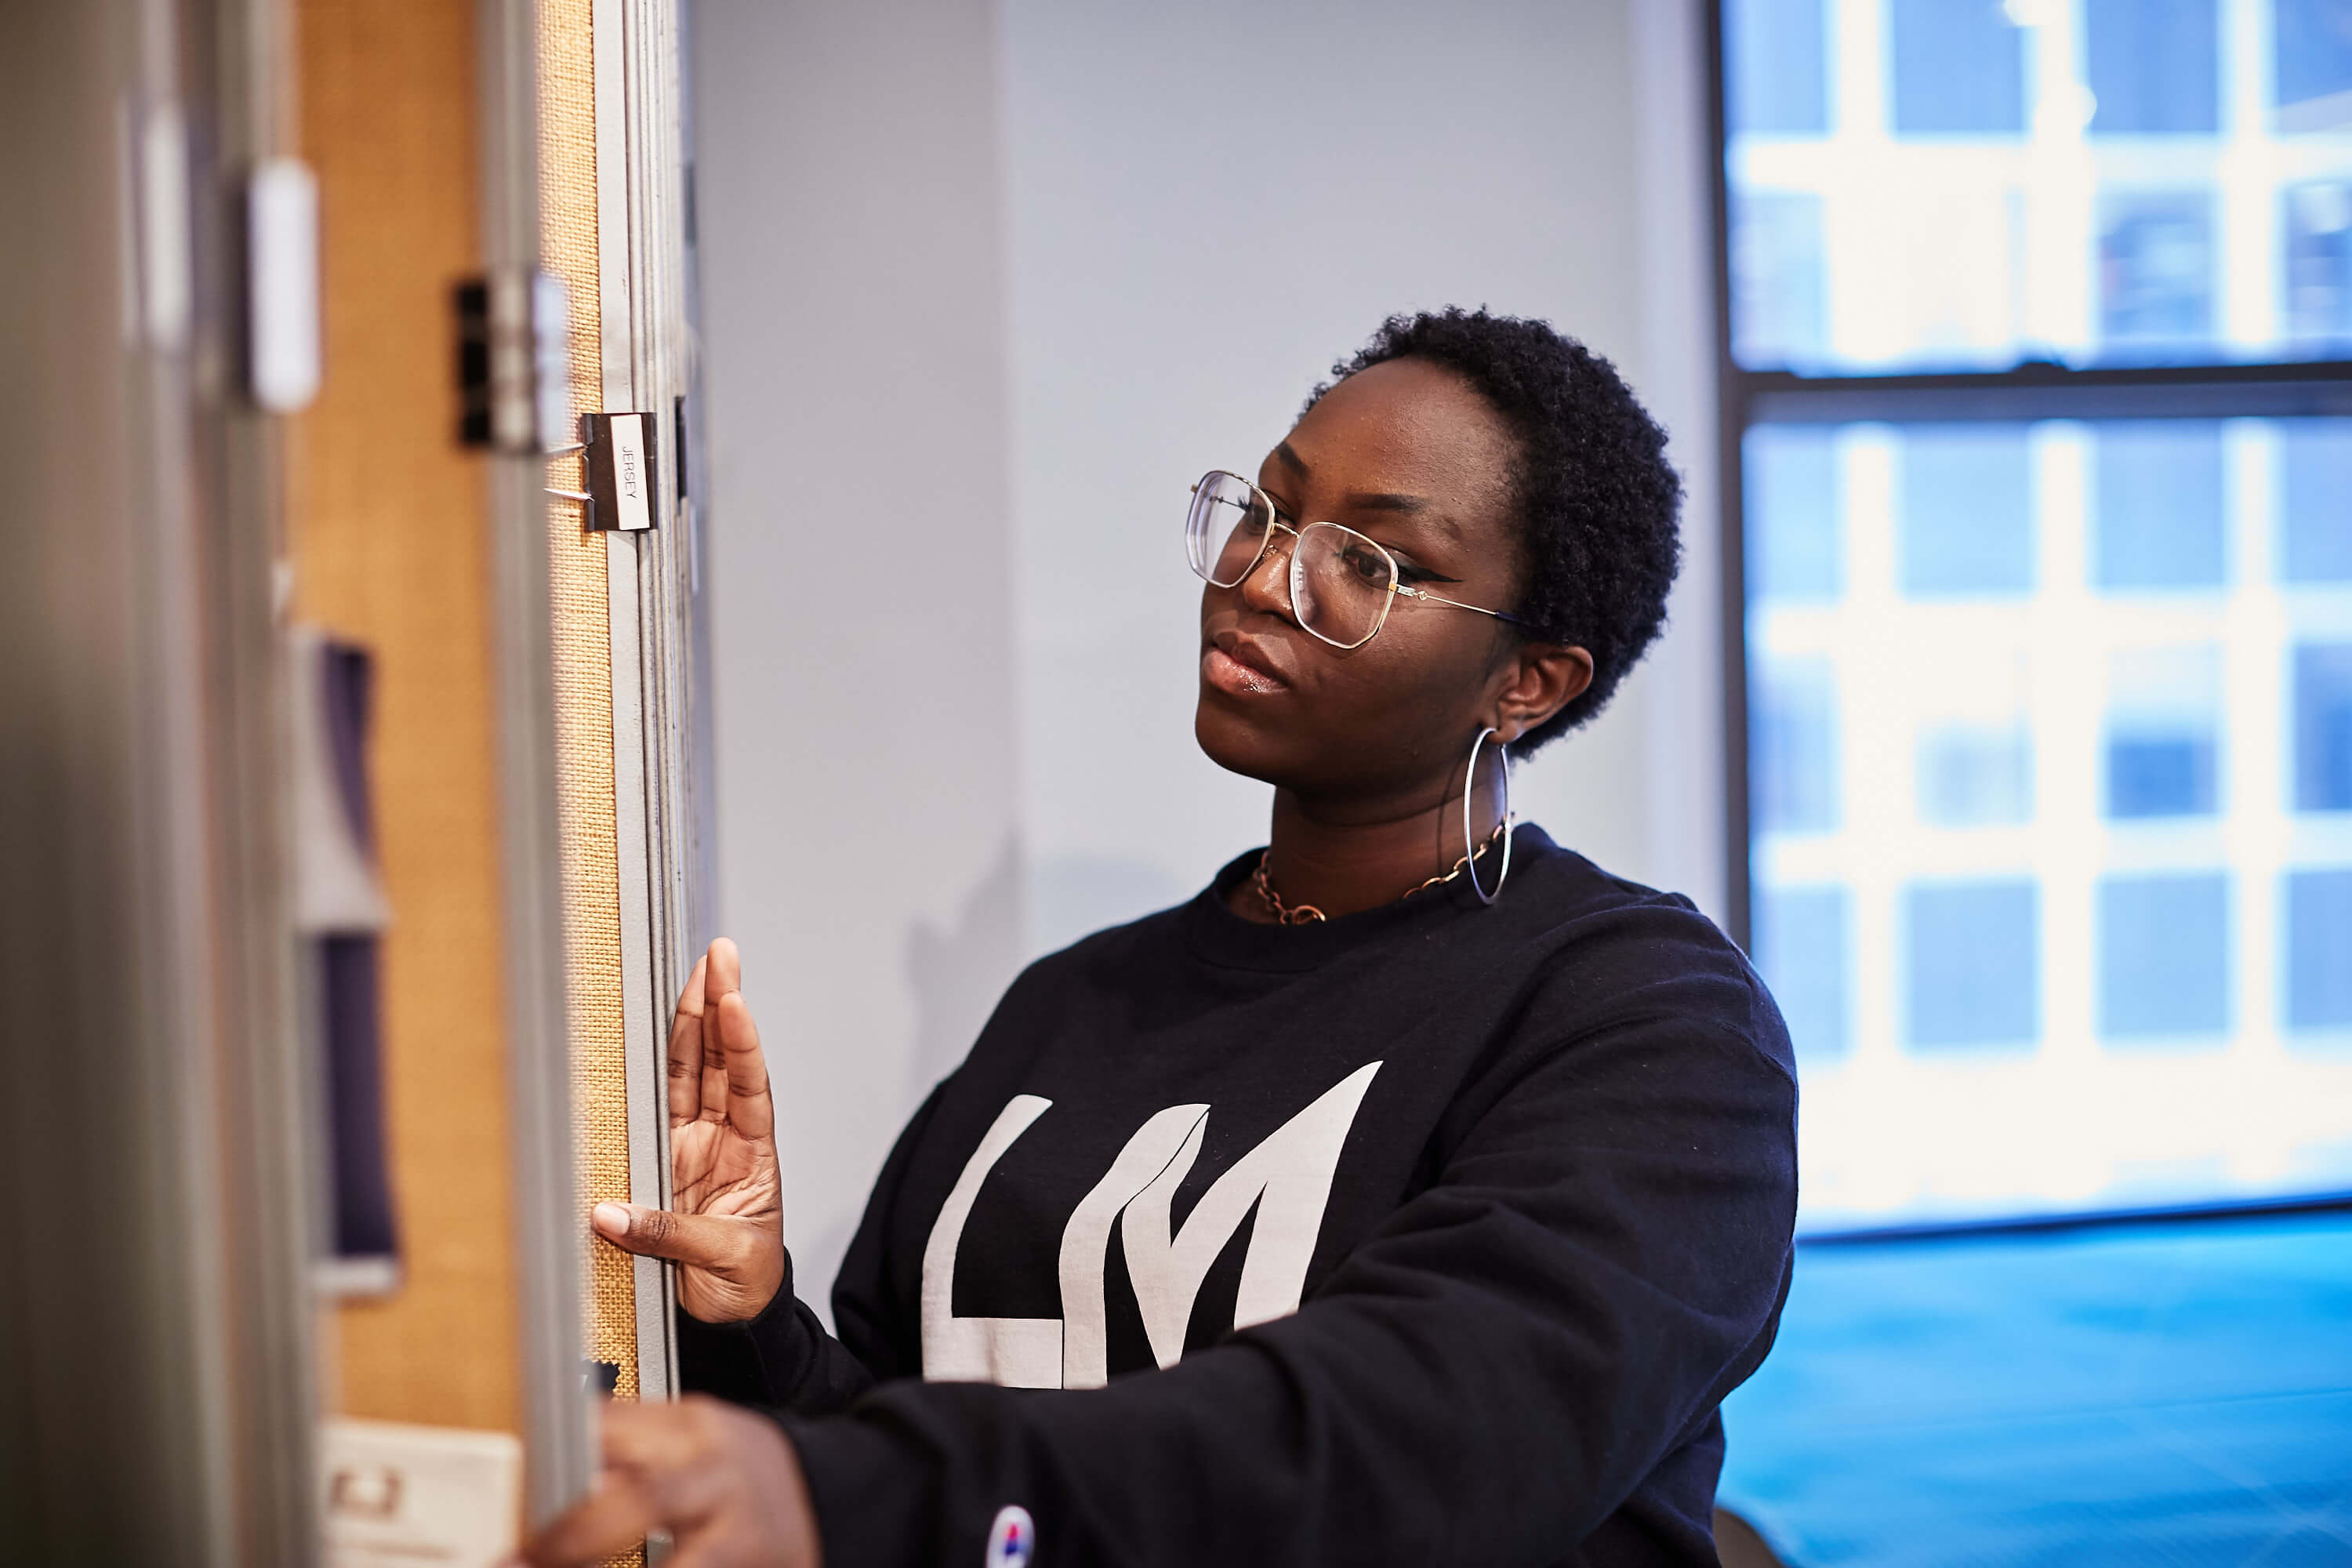 Female student in a black-and-white LIM sweatshirt looks at panels containing fabric swatches